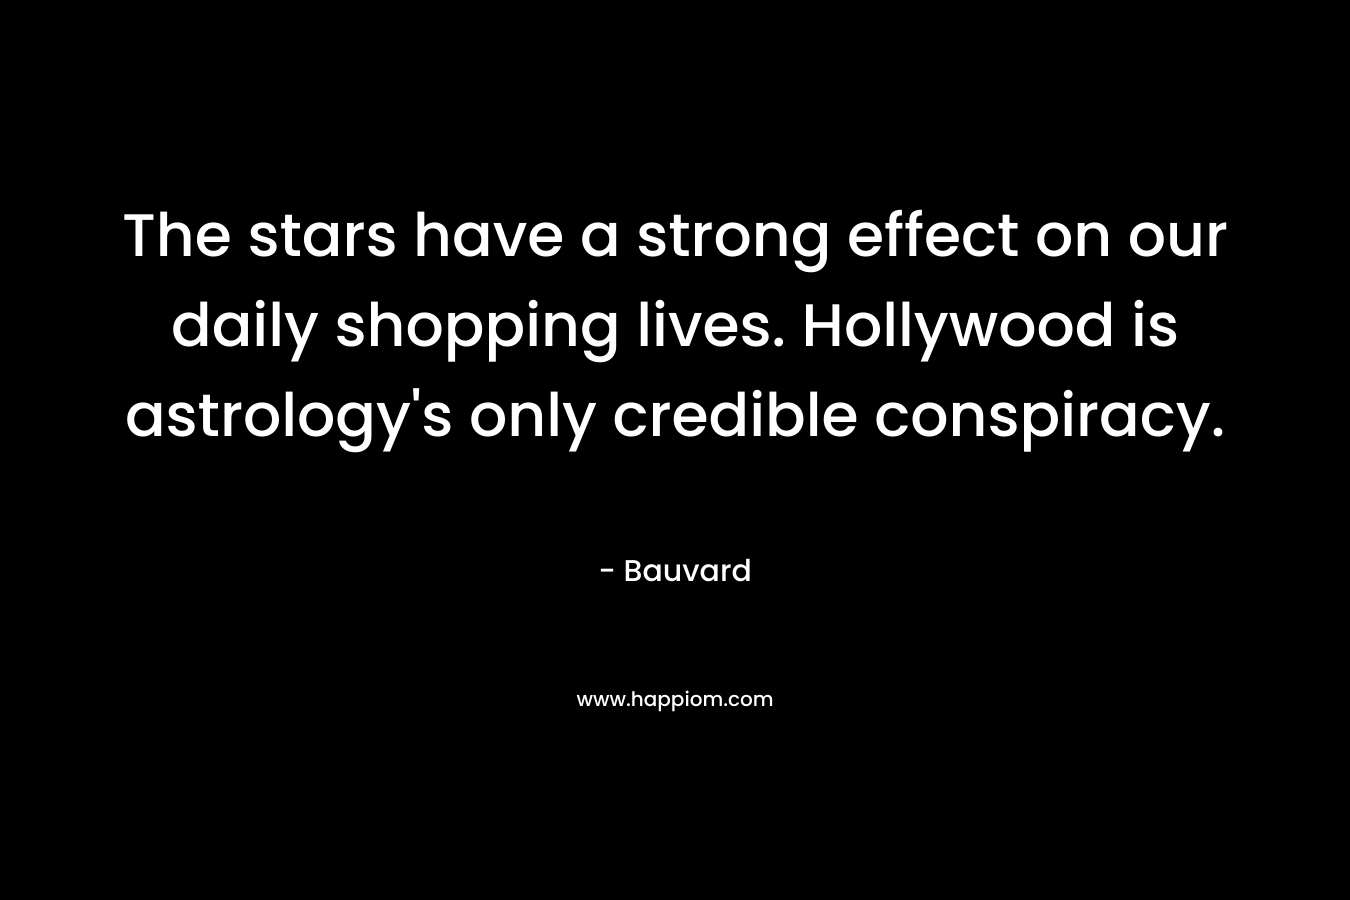 The stars have a strong effect on our daily shopping lives. Hollywood is astrology's only credible conspiracy.